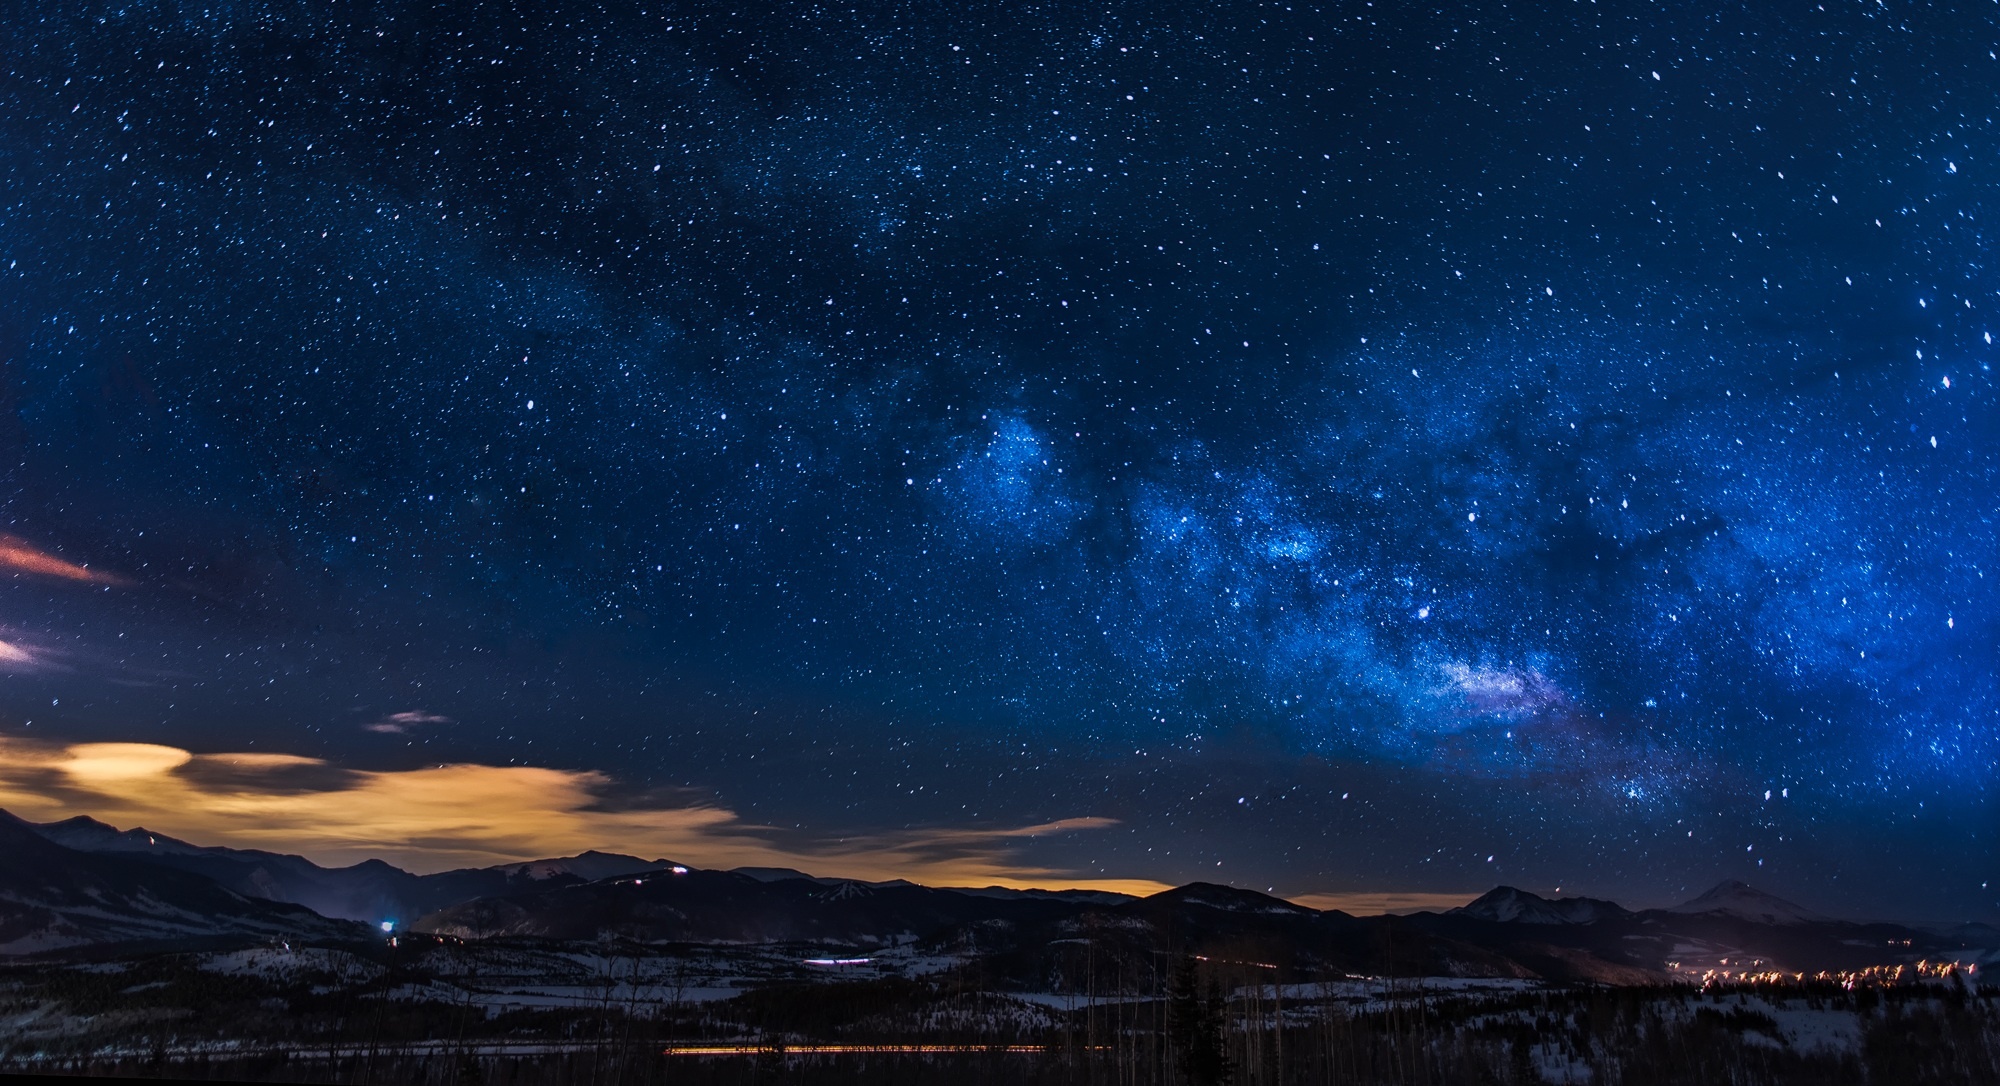 Wallpapers astronomy beautyful clouds on the desktop